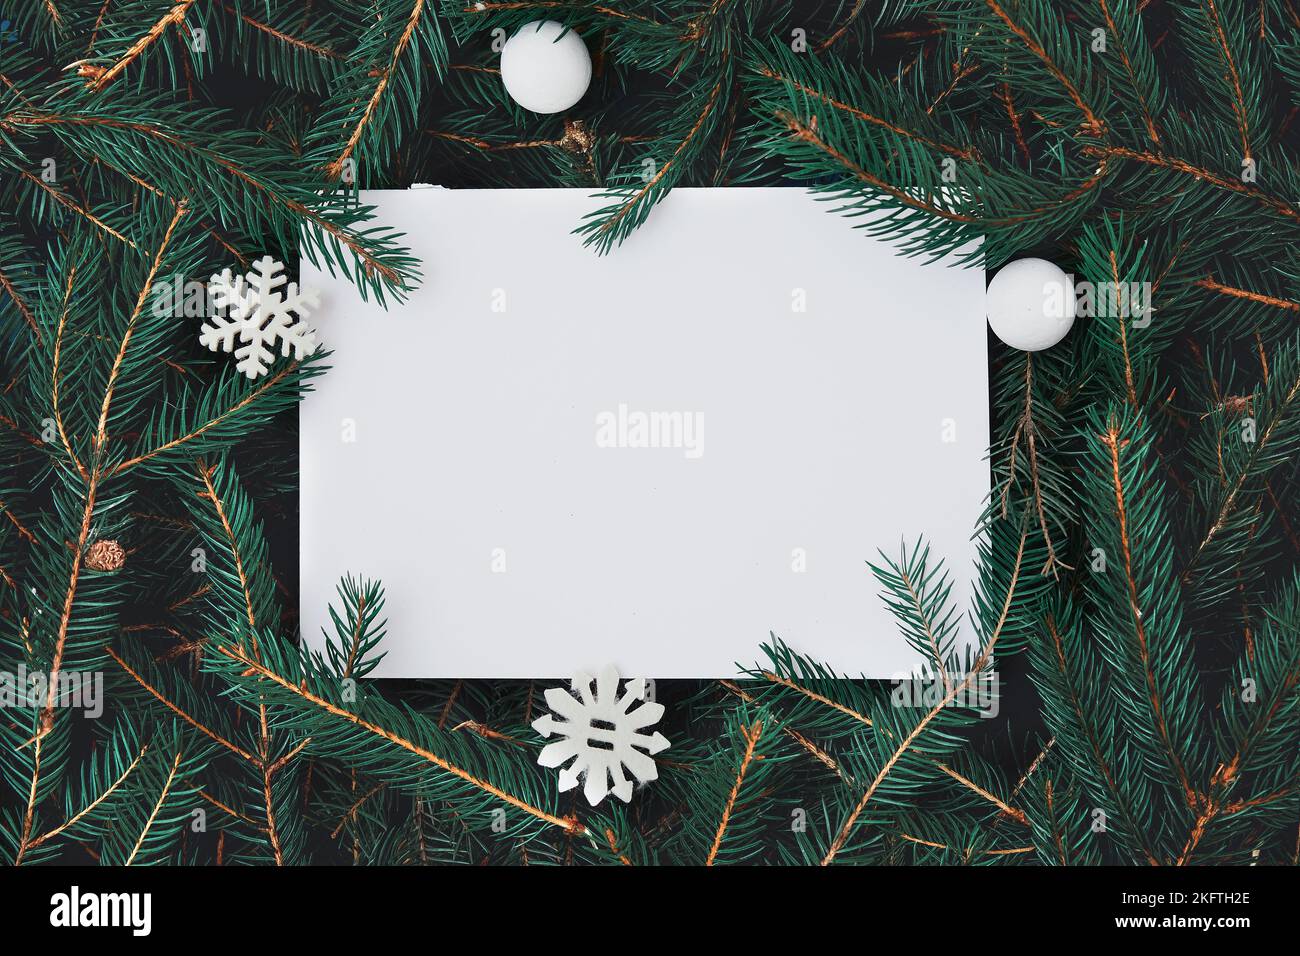 Creative layout made of Christmas tree branches with paper card note. Nature New Year concept. Stock Photo